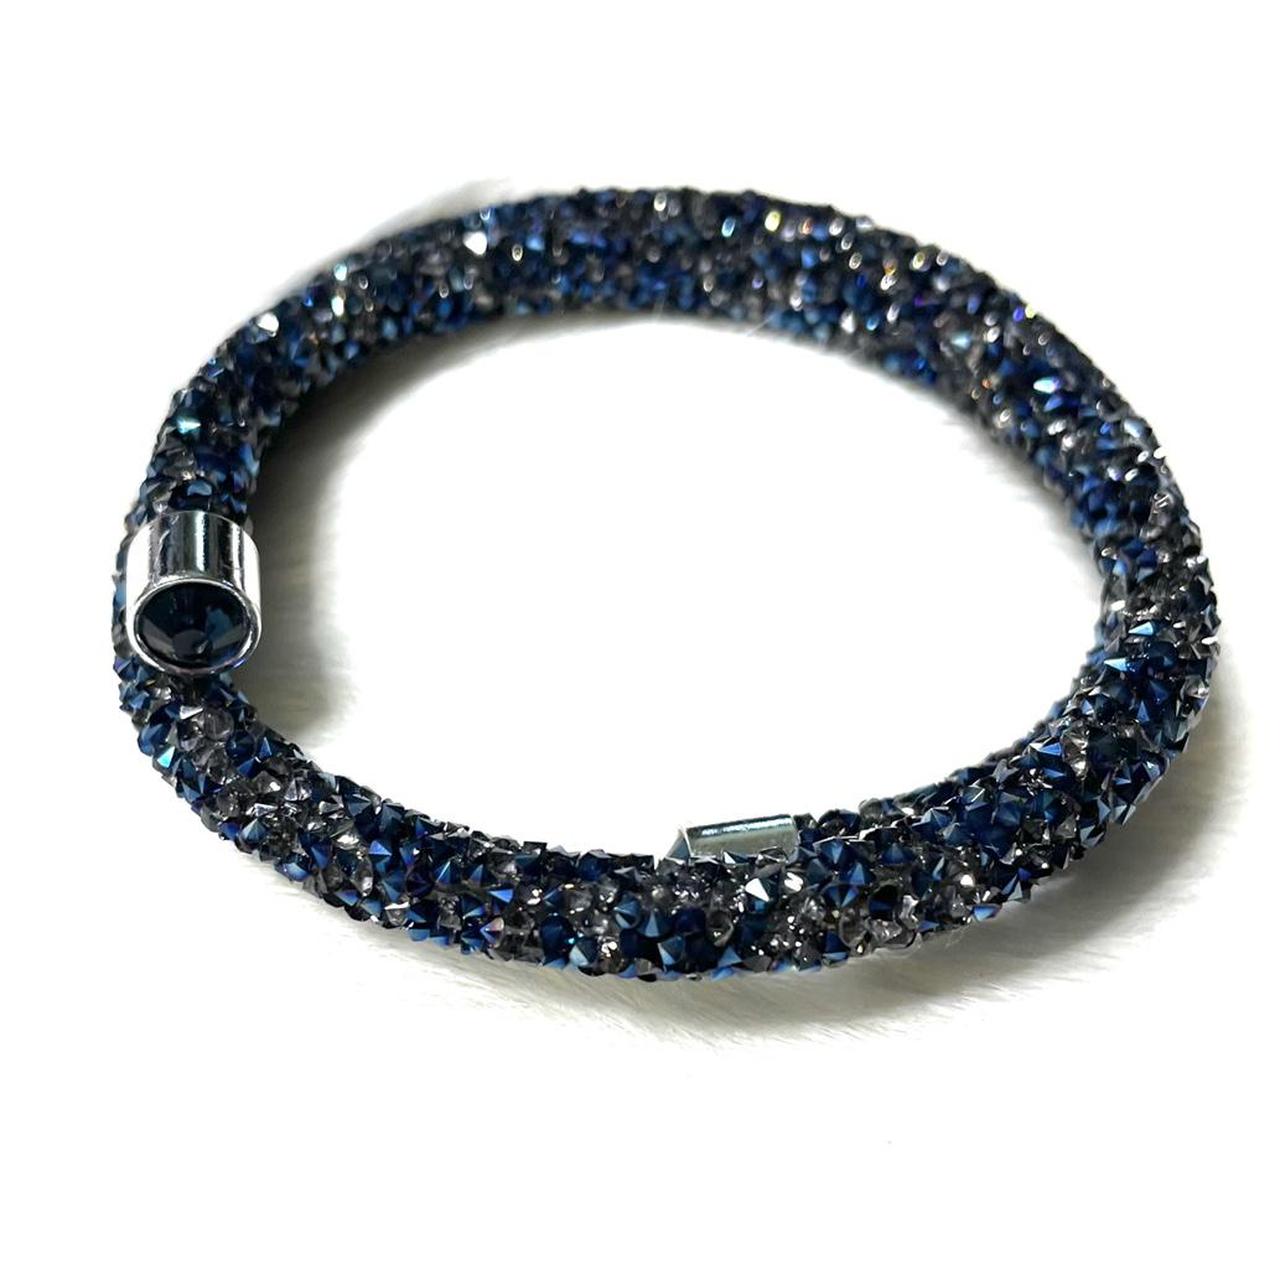 Product Image 1 - Crystal Chip Wrap Bracelet. This